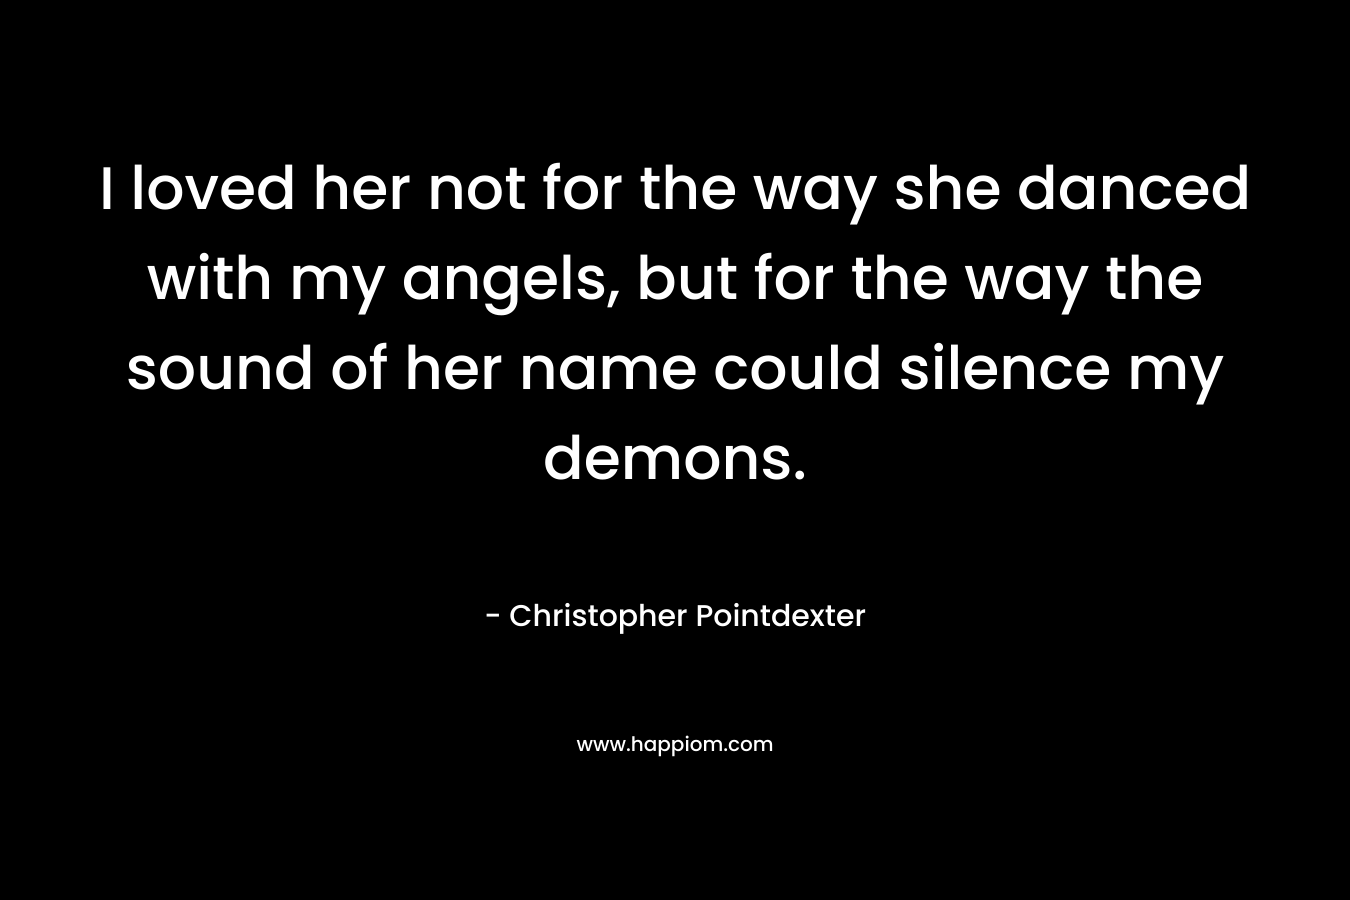 I loved her not for the way she danced with my angels, but for the way the sound of her name could silence my demons. – Christopher Pointdexter